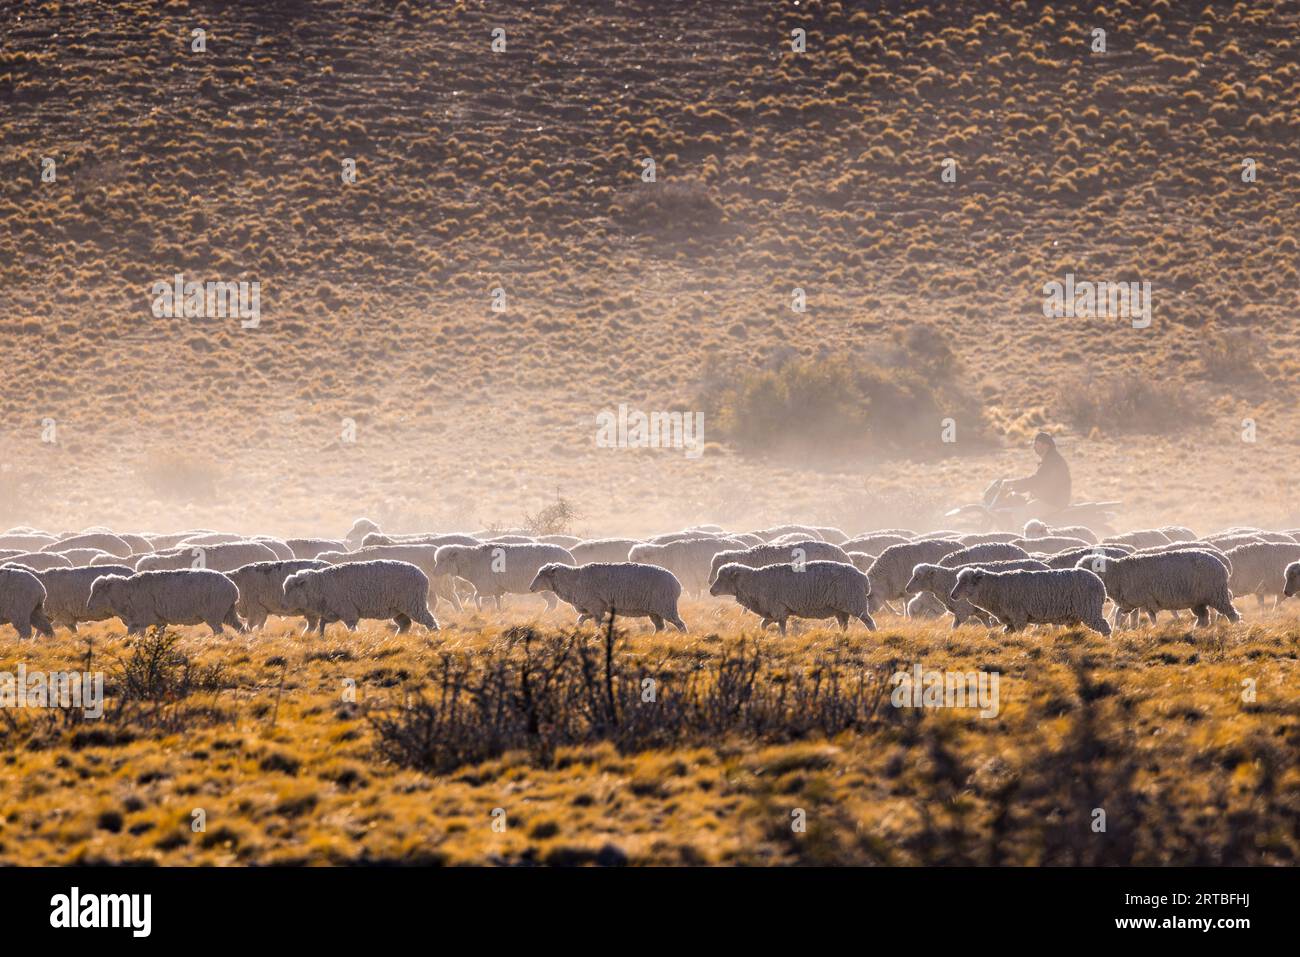 A gaucho on a motorcycle drives a herd of sheep together on an estancia against the light, Argentina, Patagonia Stock Photo